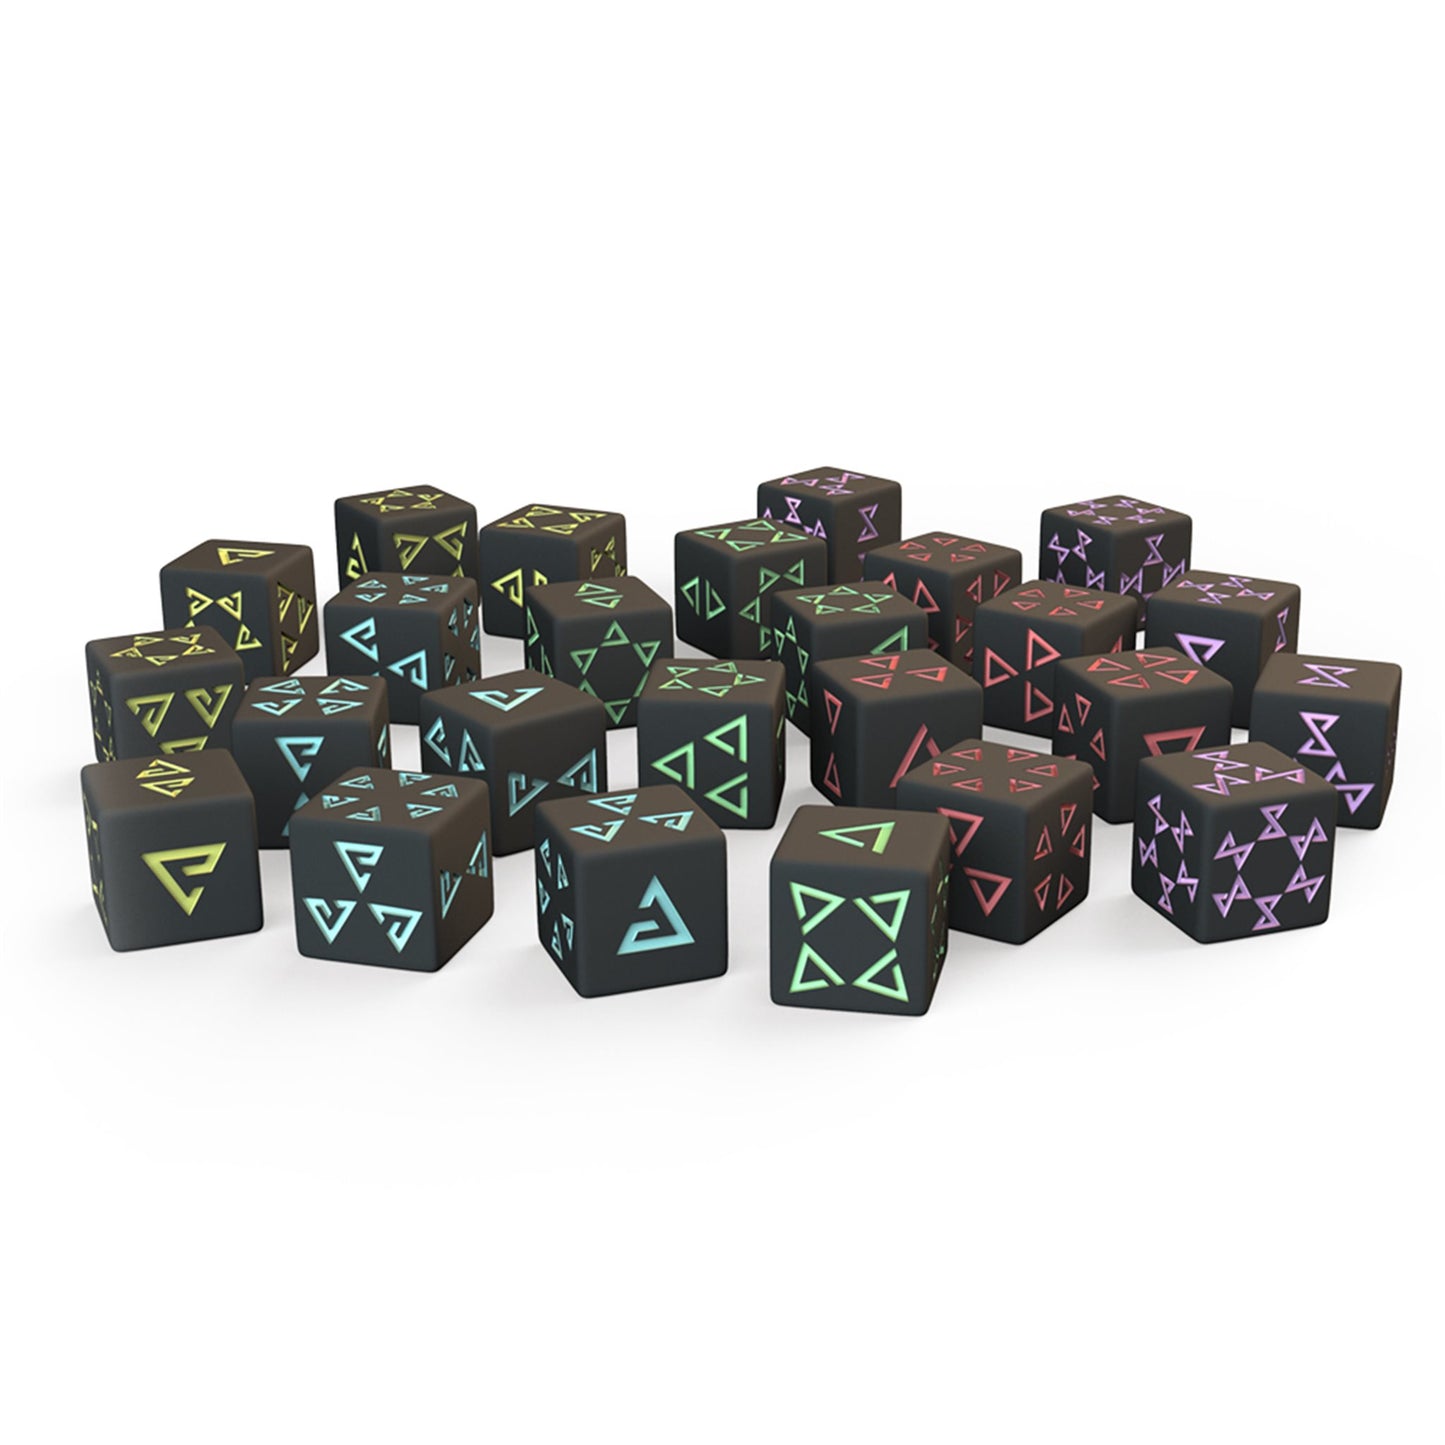 The Witcher: Old World - Dice Set